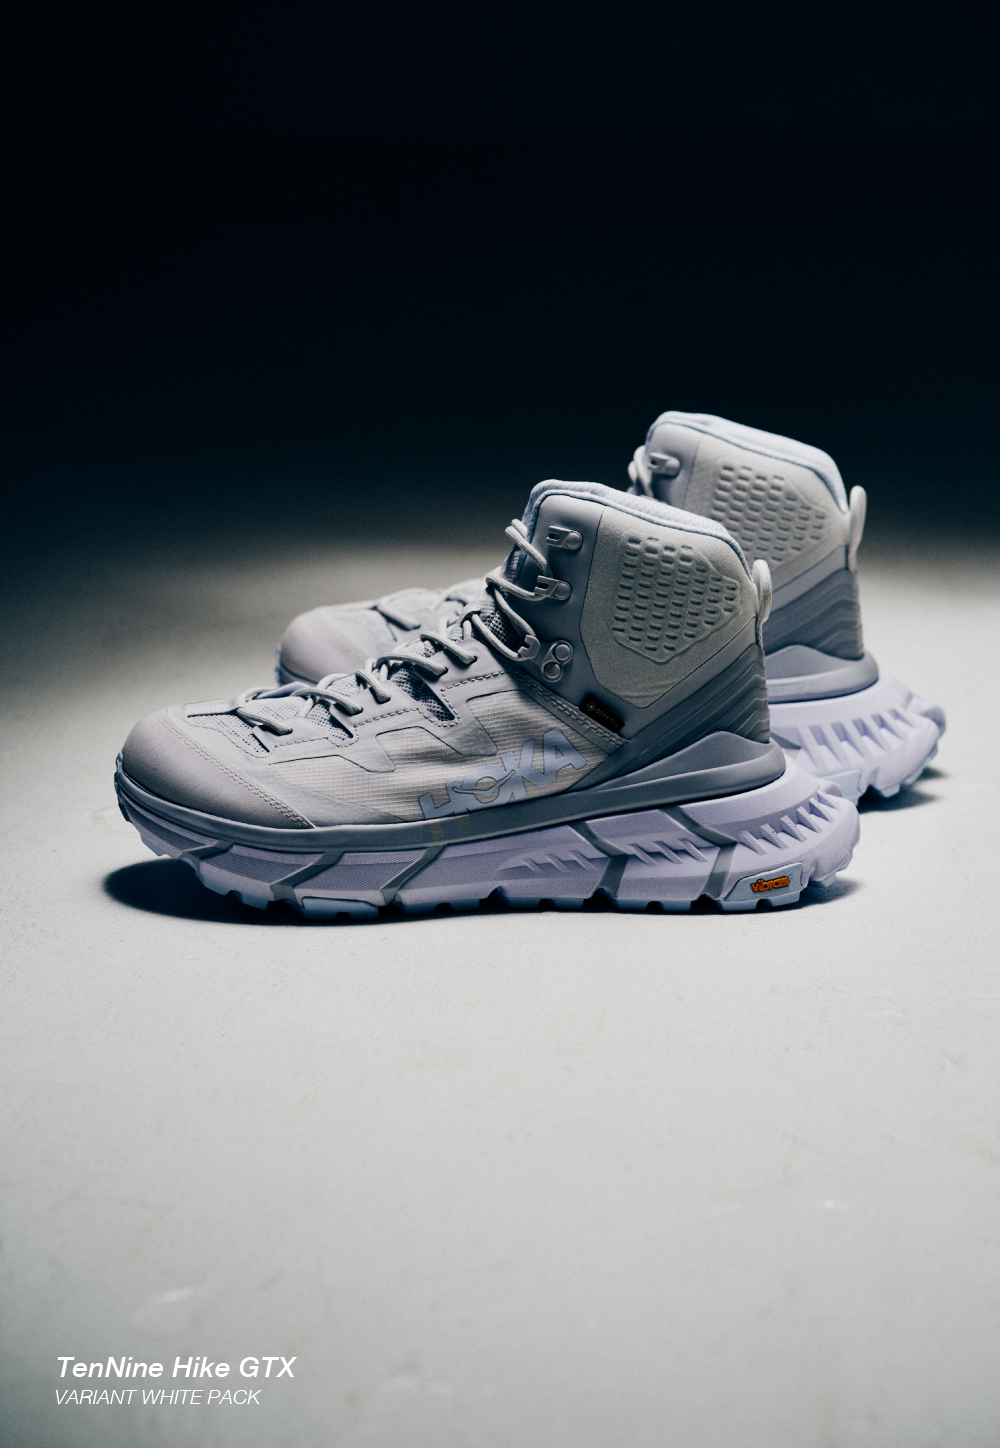 HOKA ONE ONE 2021 S/S COLLECTION “VARIANT WHITE PACK” | SHOES MASTER